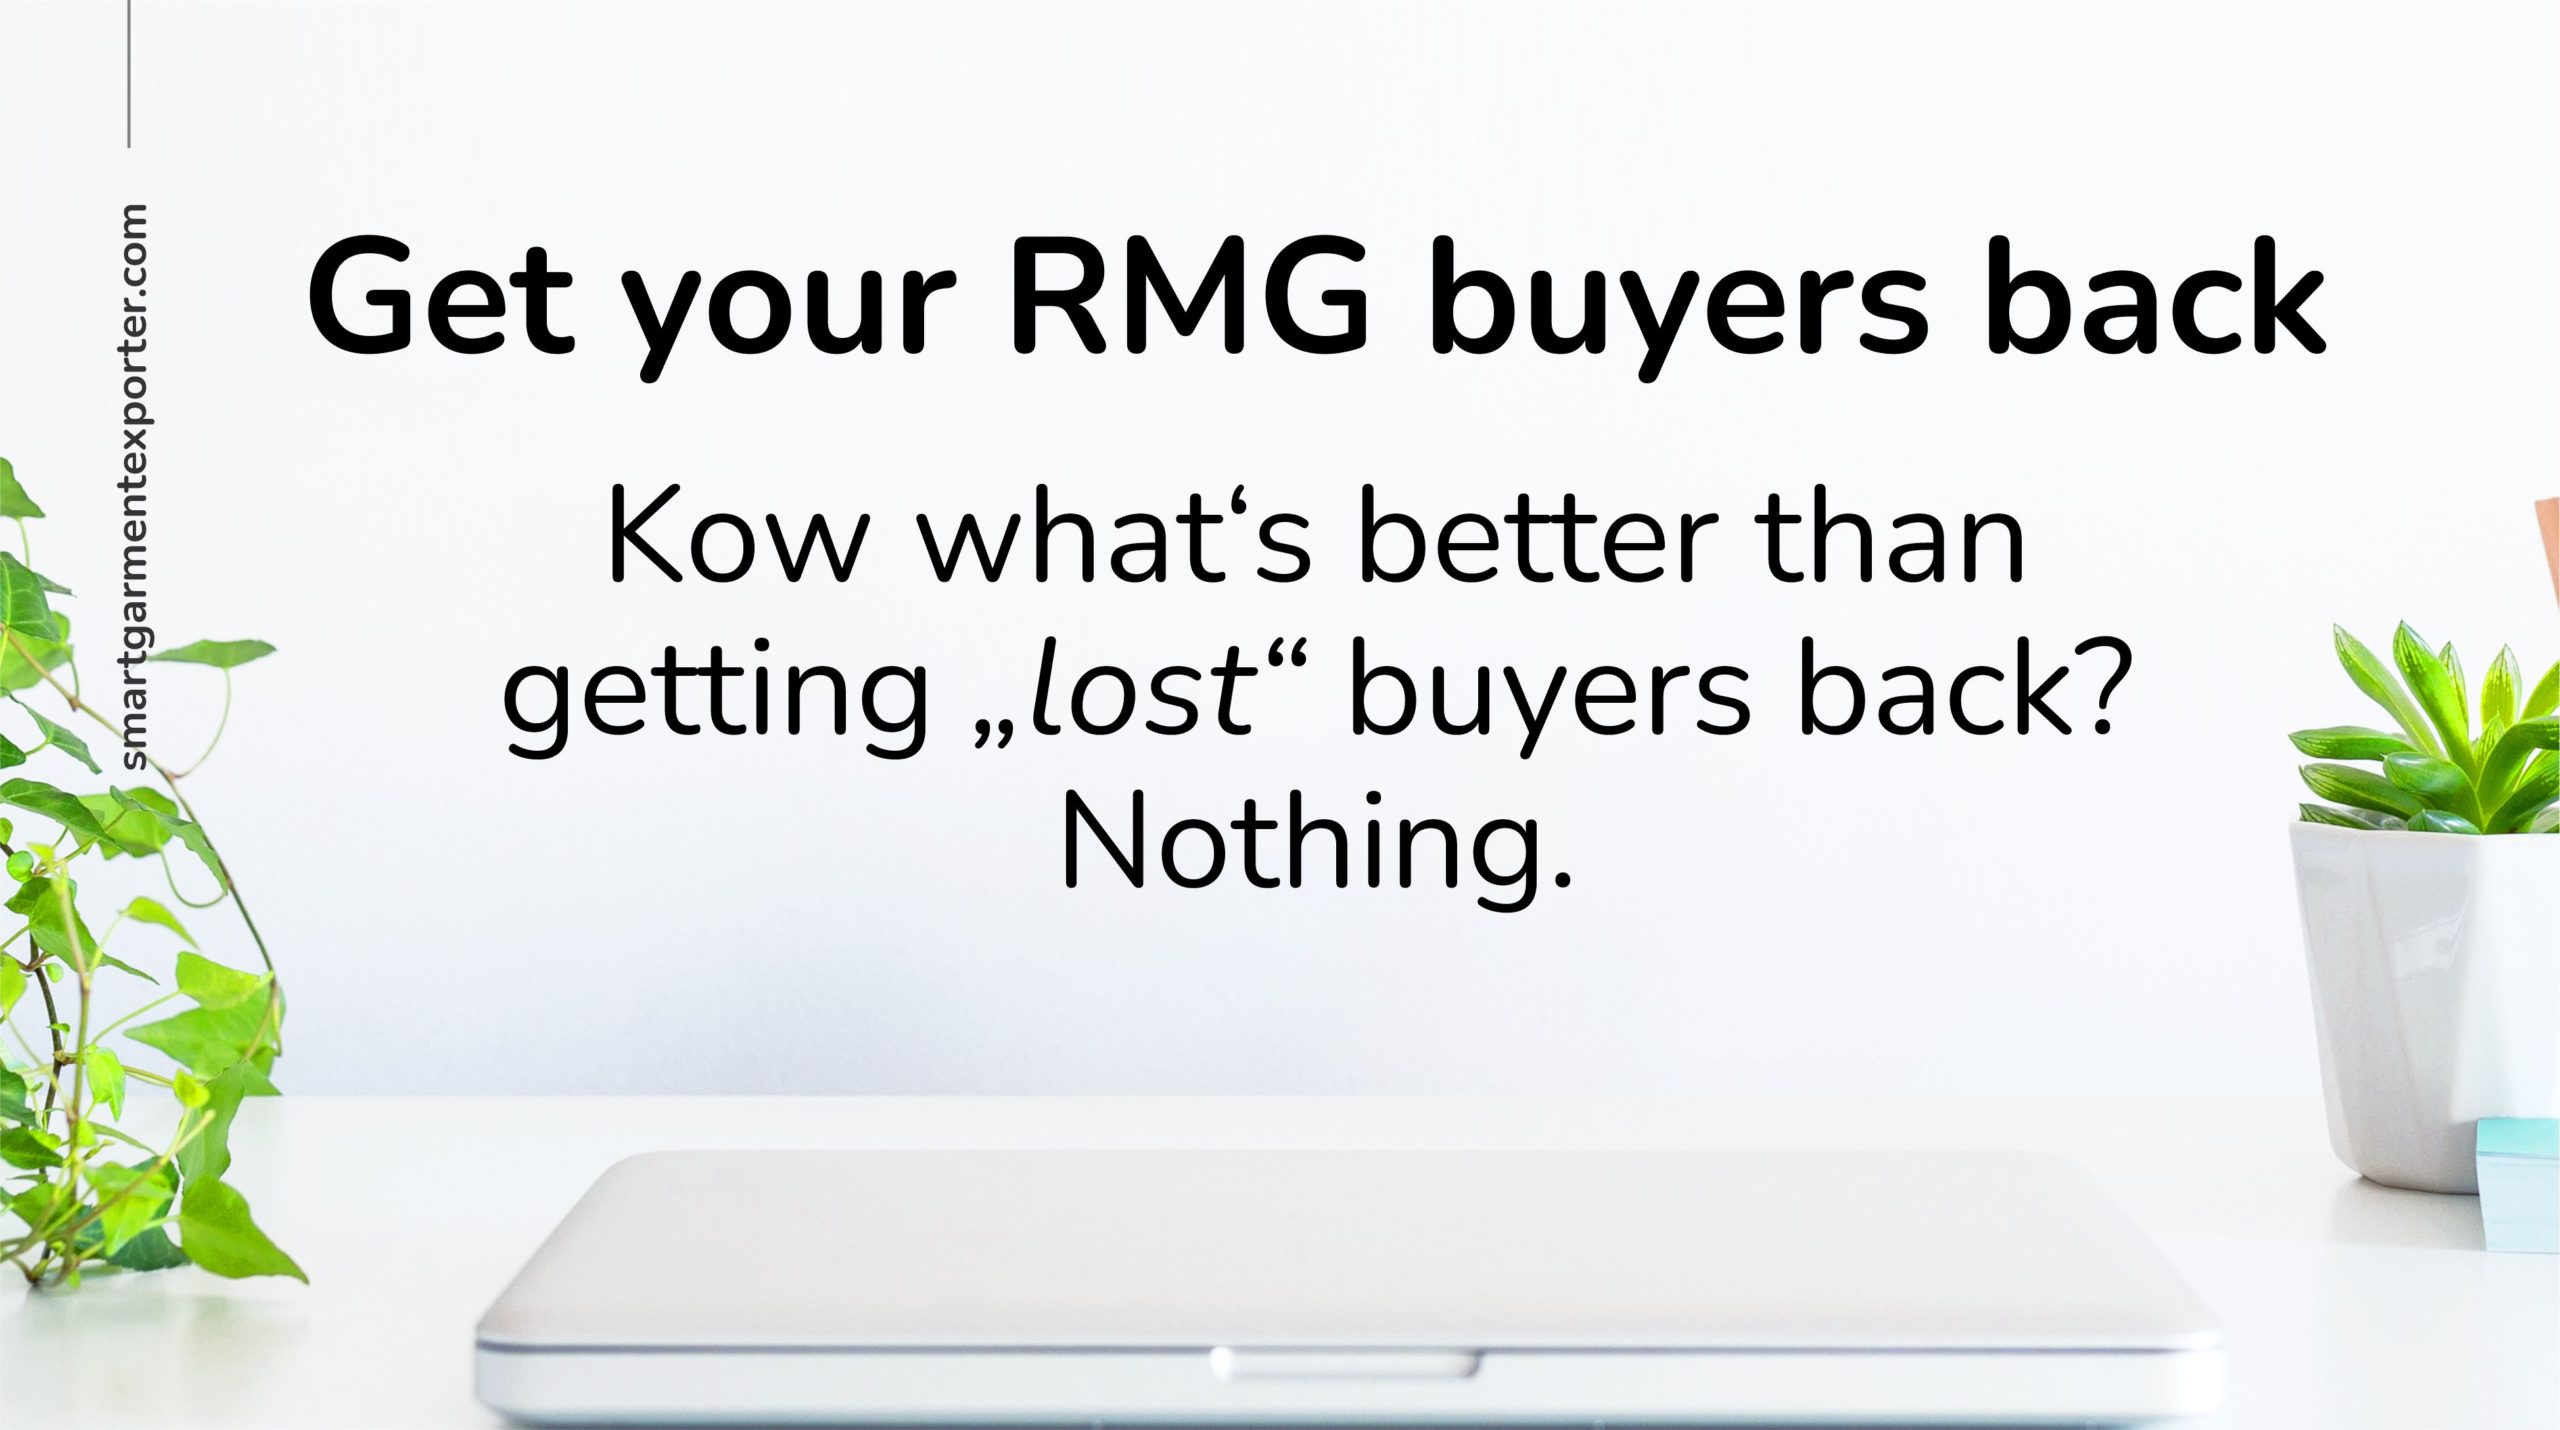 Get your buyers back. Know what‘s better than getting „lost“ buyers back? Nothing.